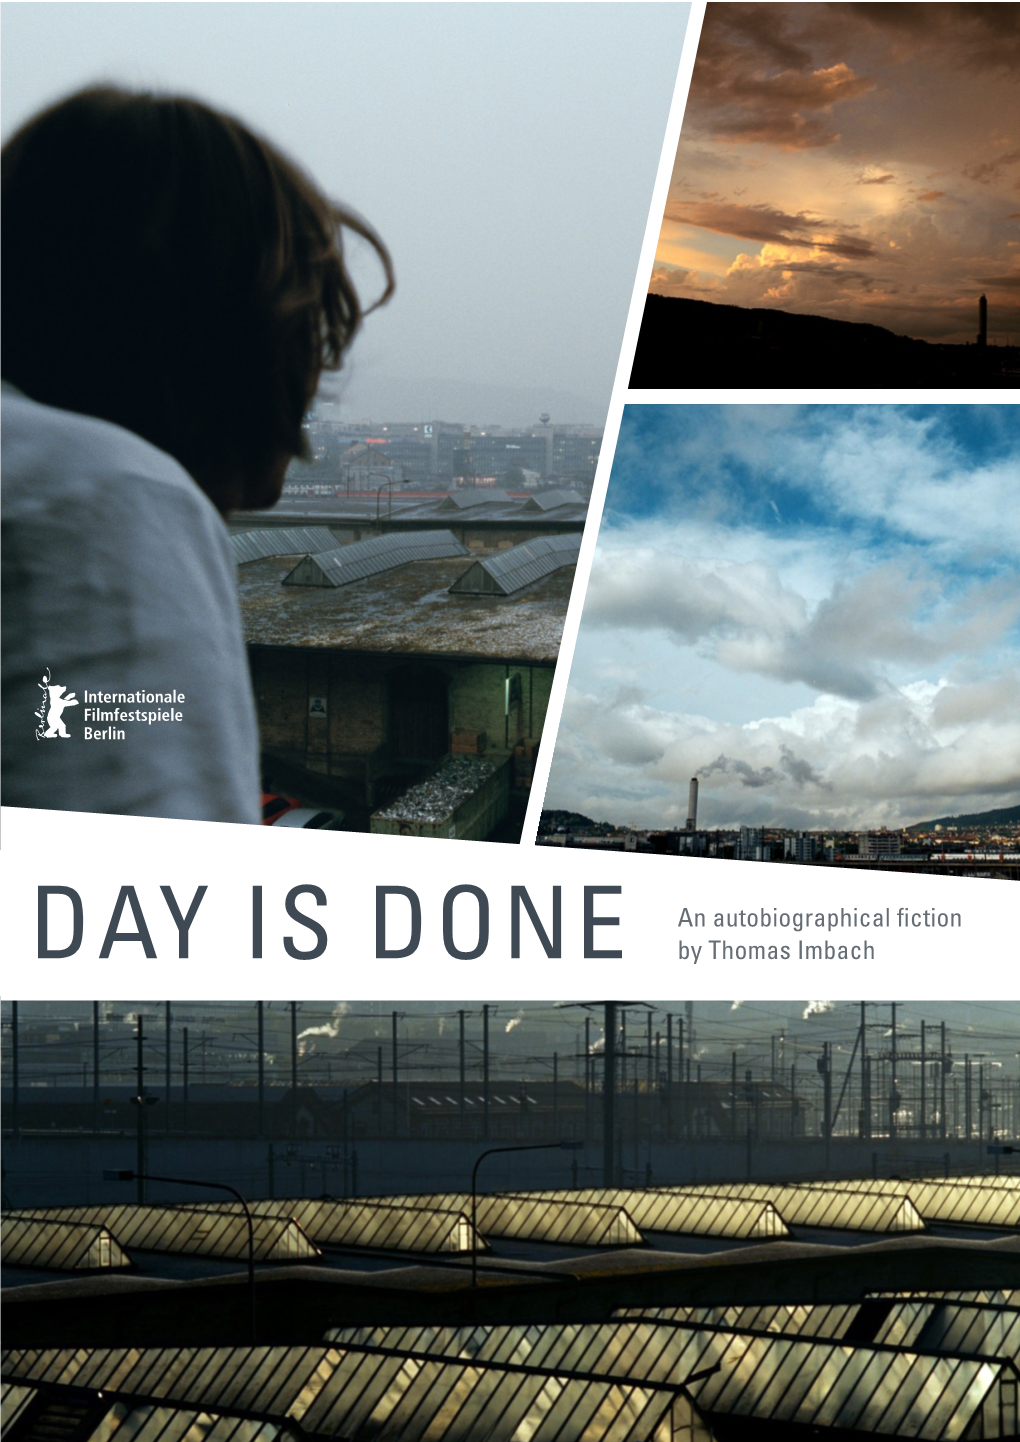 DAY IS DONE an Autobiographical Fiction by Thomas Imbach